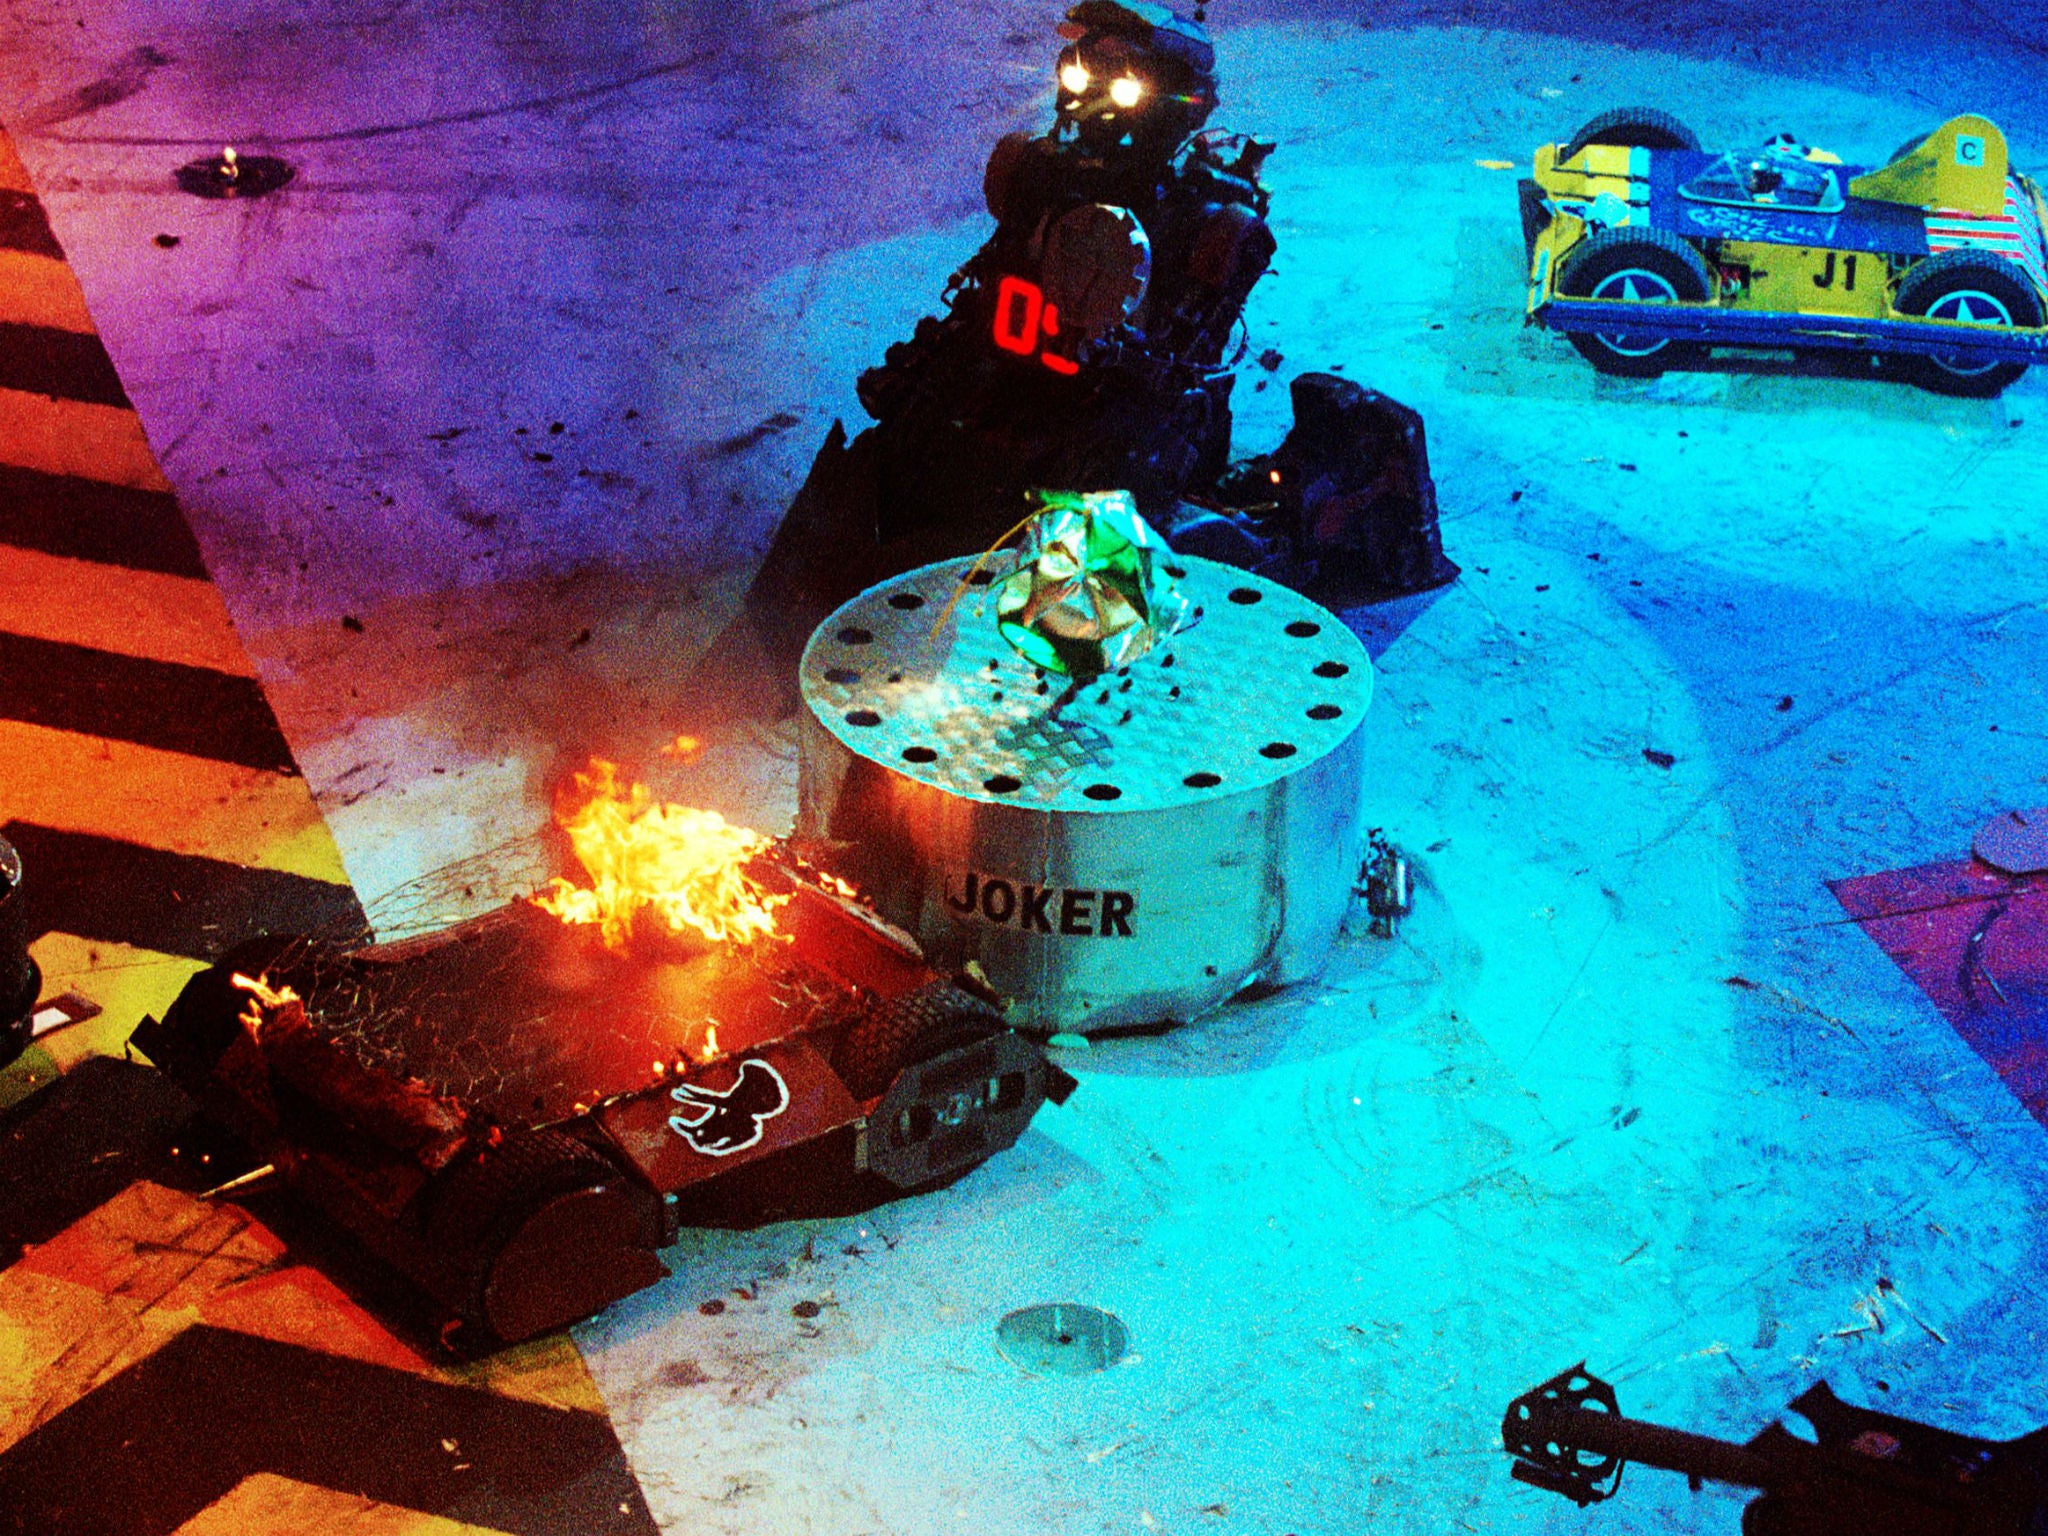 &#13;
Robot Wars originally aired from 1998 until 2004 &#13;